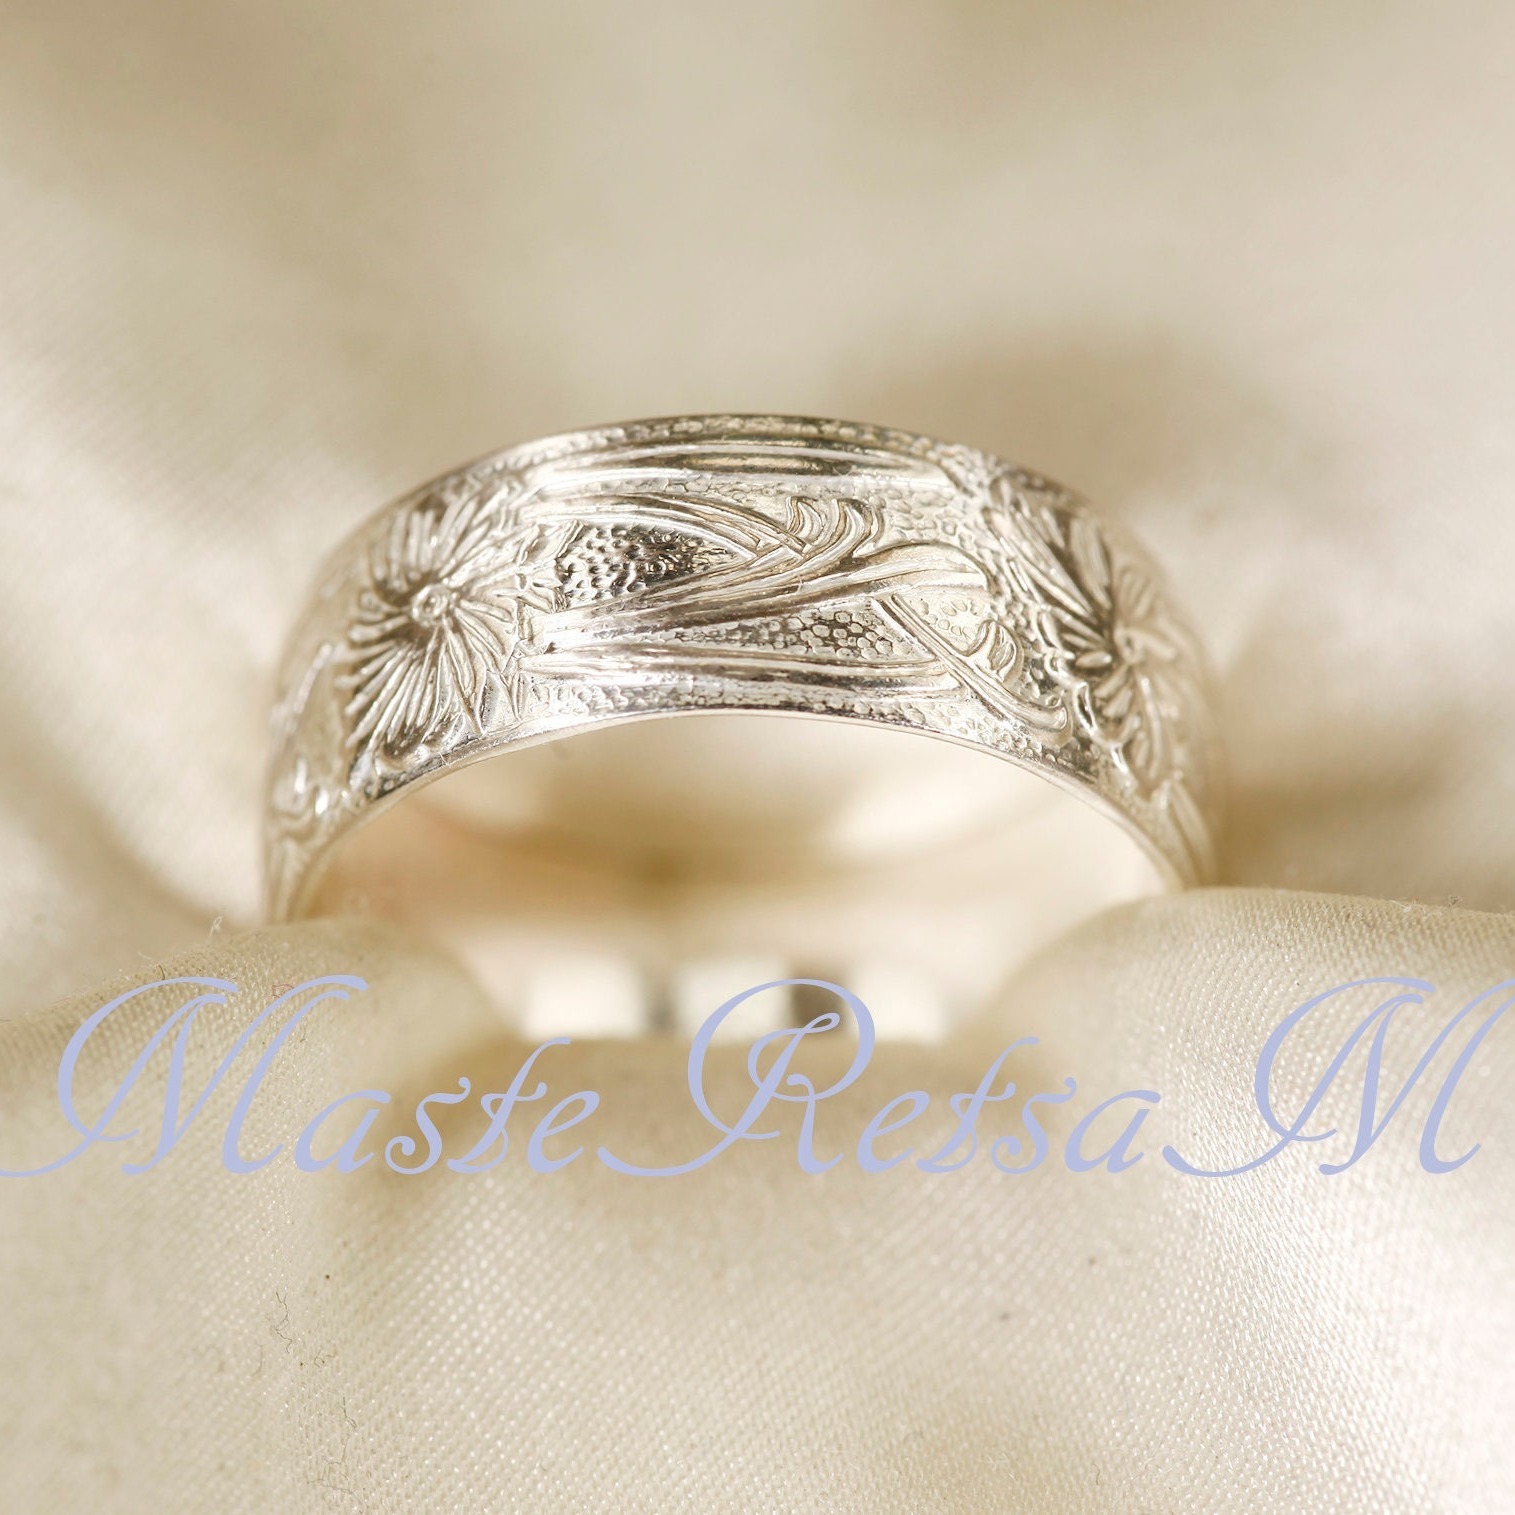 

(2107) Wide 925 Sterling Silver Floral Pattern Ring, Handmade 925 Sterling Silver Ring, Handmade In The U.s. 7.7mm Width (u.s. Standard Size, Recommend Half Size Up Due To 7.7mm Width)